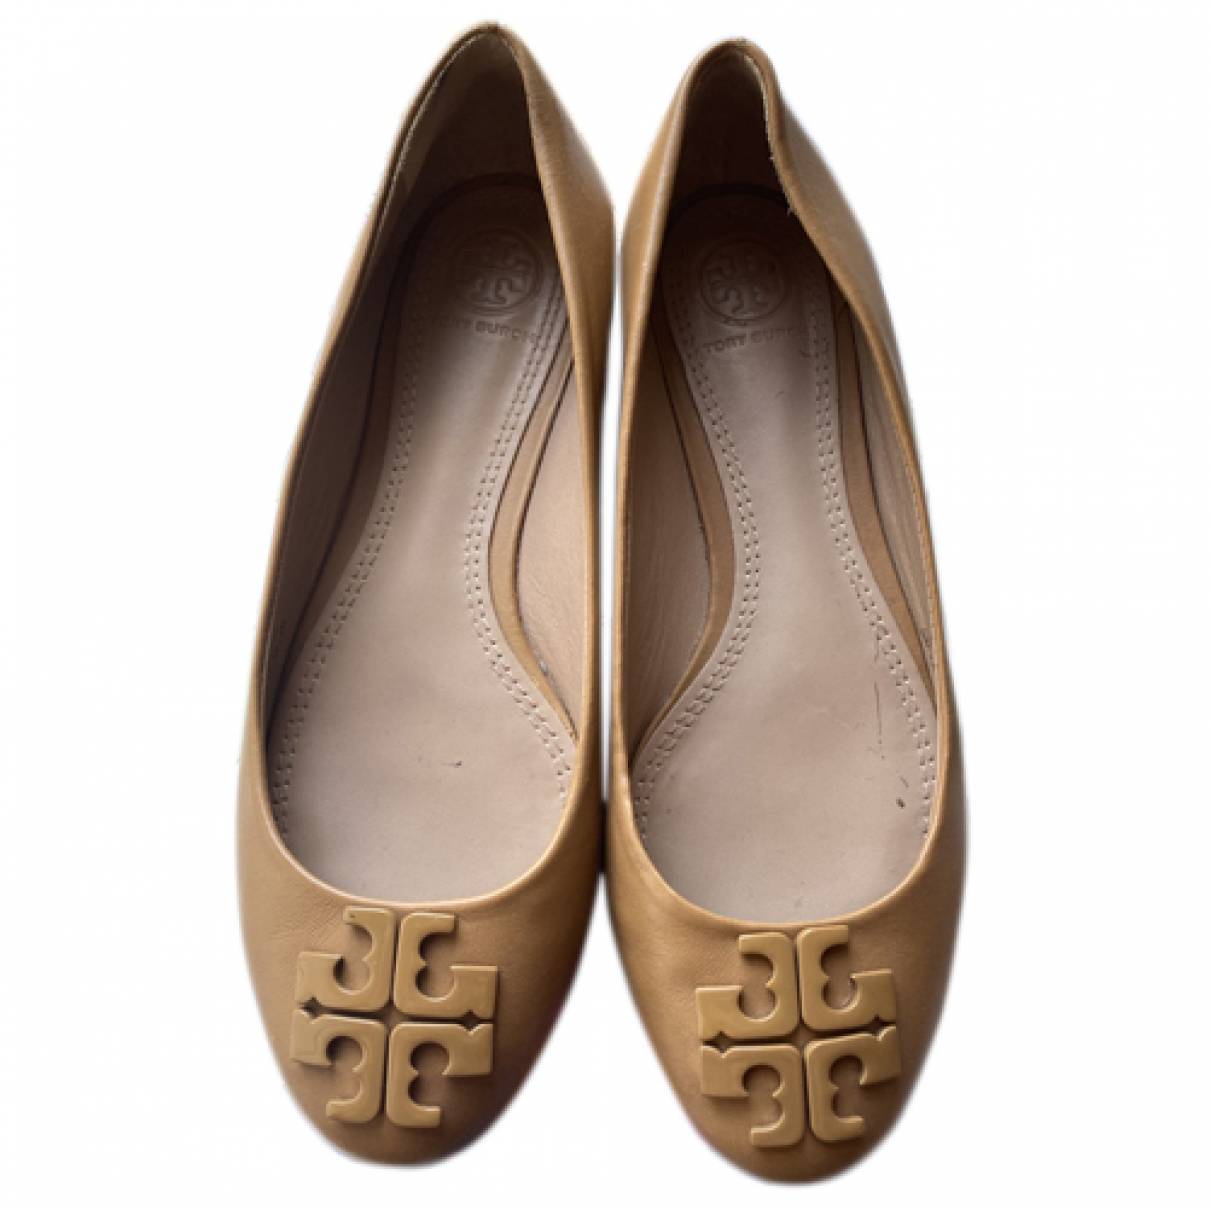 Leather ballet flats Tory Burch Camel size 6 US in Leather - 25520583